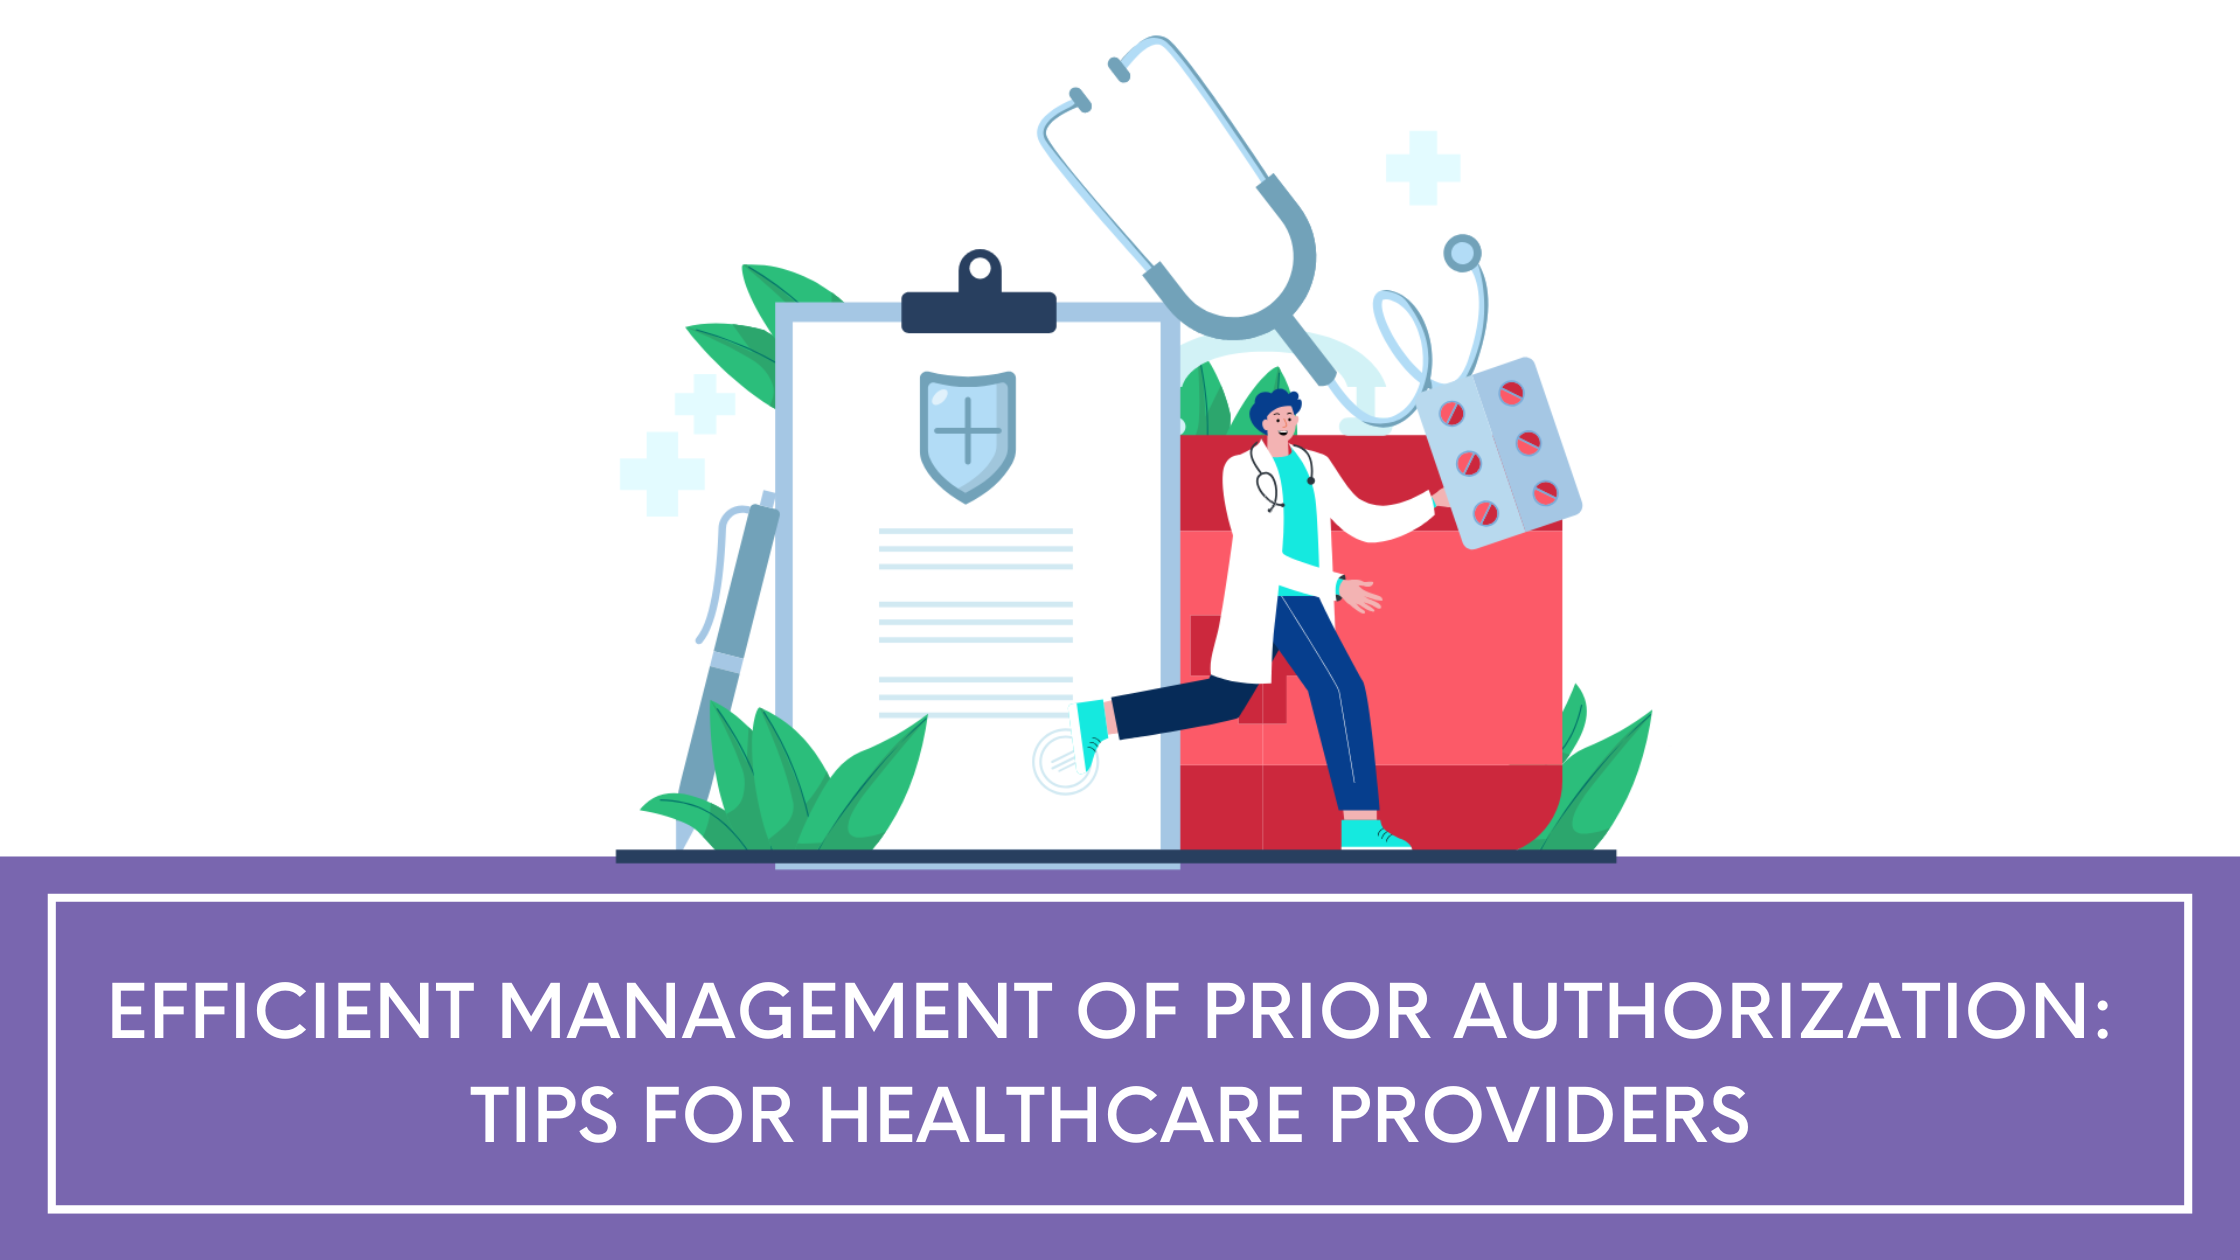 Efficient Management of Prior Authorization: Tips for Healthcare Providers